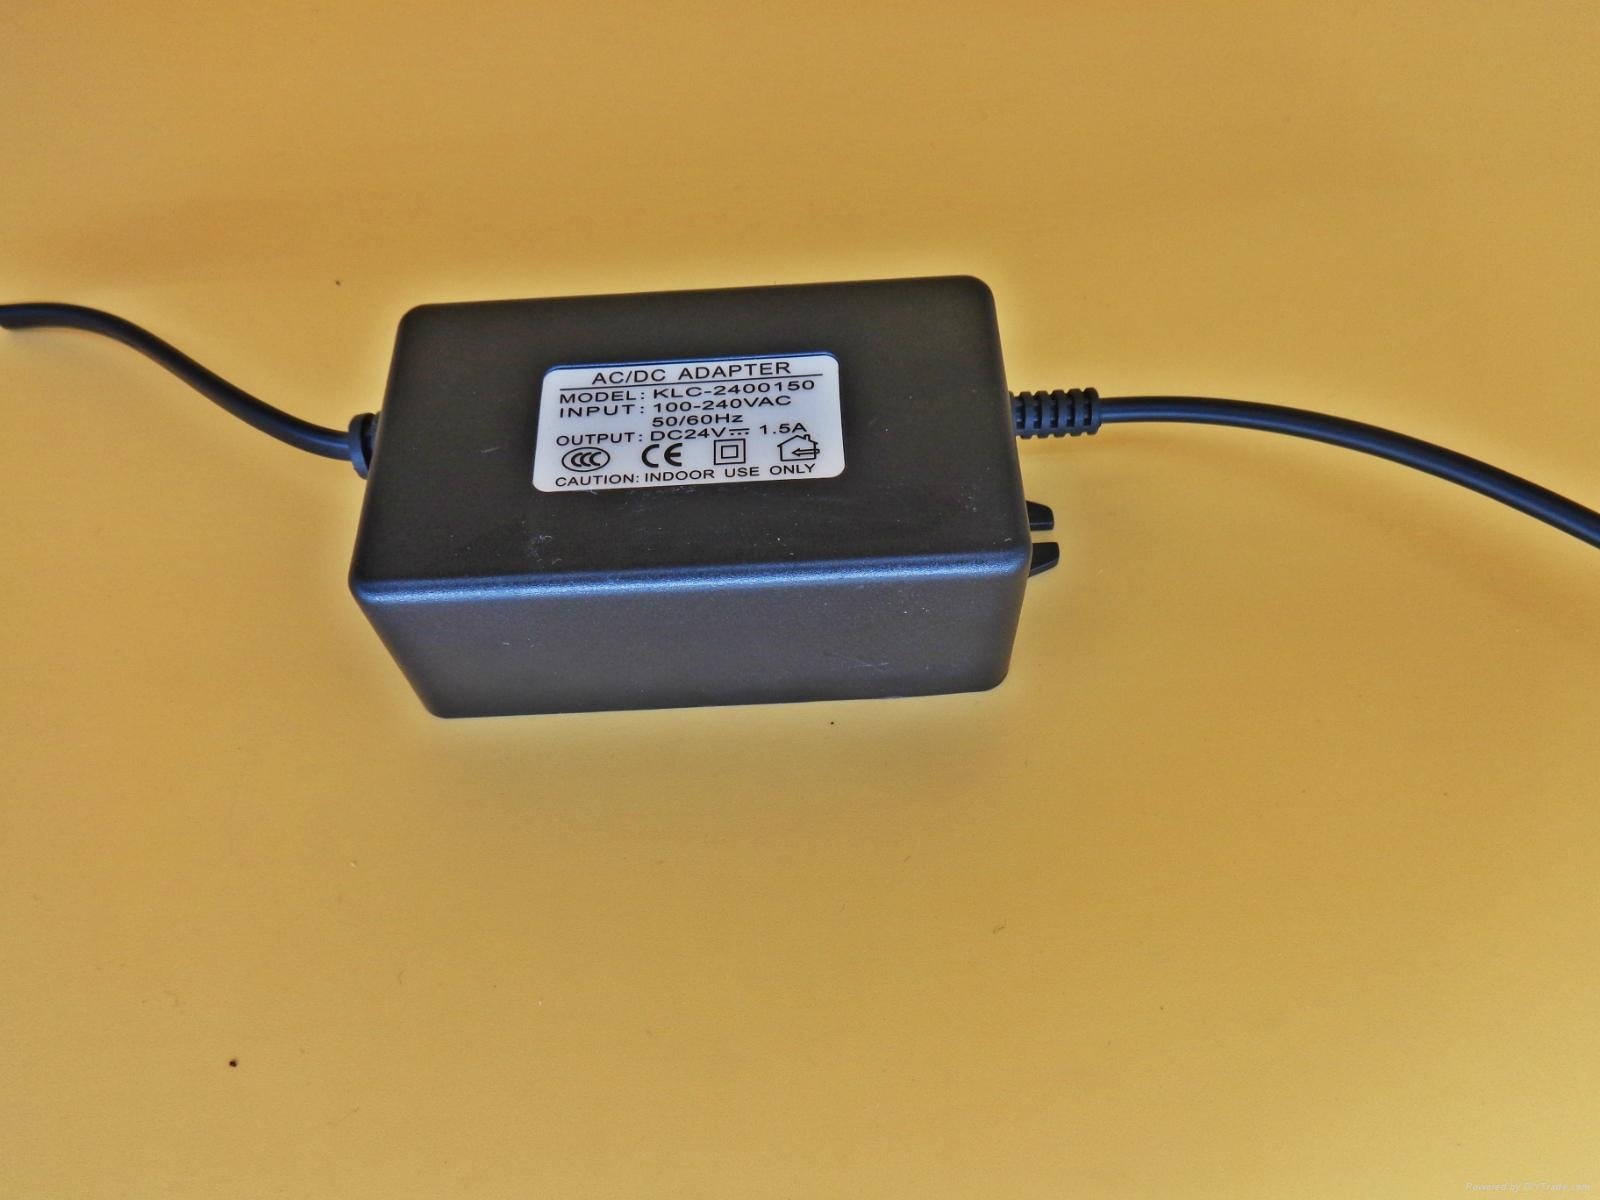 24v 1.5a ac/dc power adapter&adaptor for water purifier 3